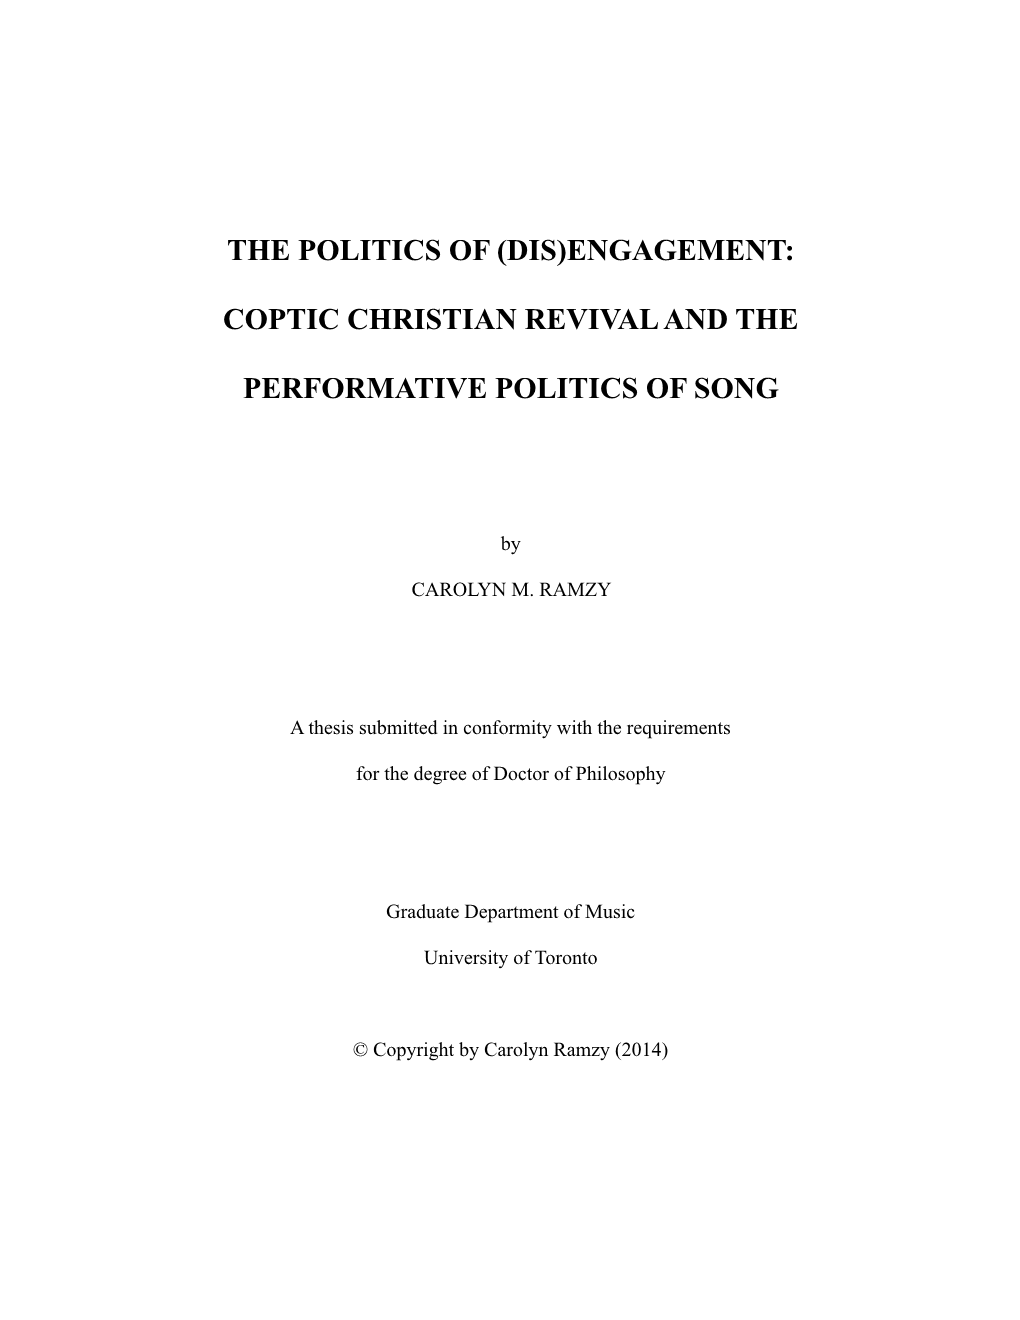 (Dis)Engagement: Coptic Christian Revival and the Performative Politics of Song